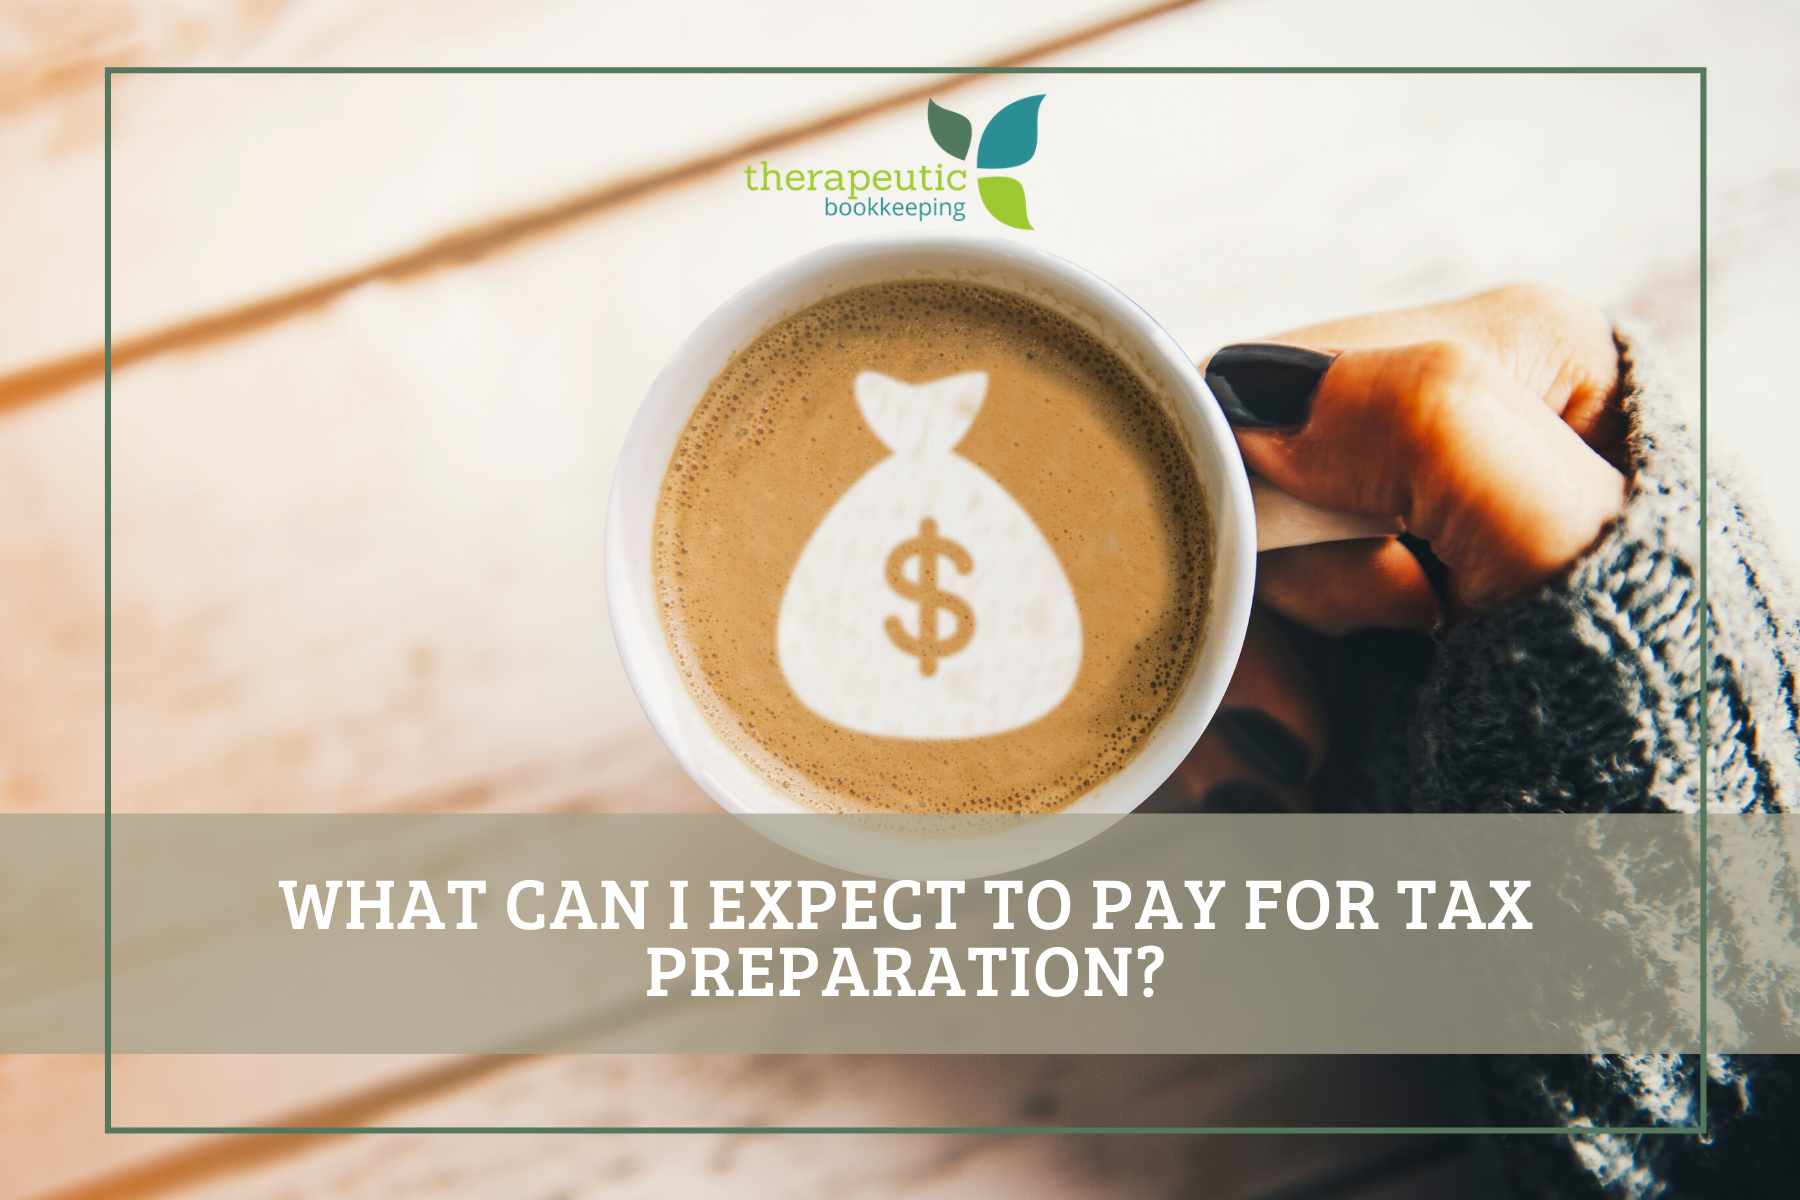 What can I expect to pay for tax preparation?